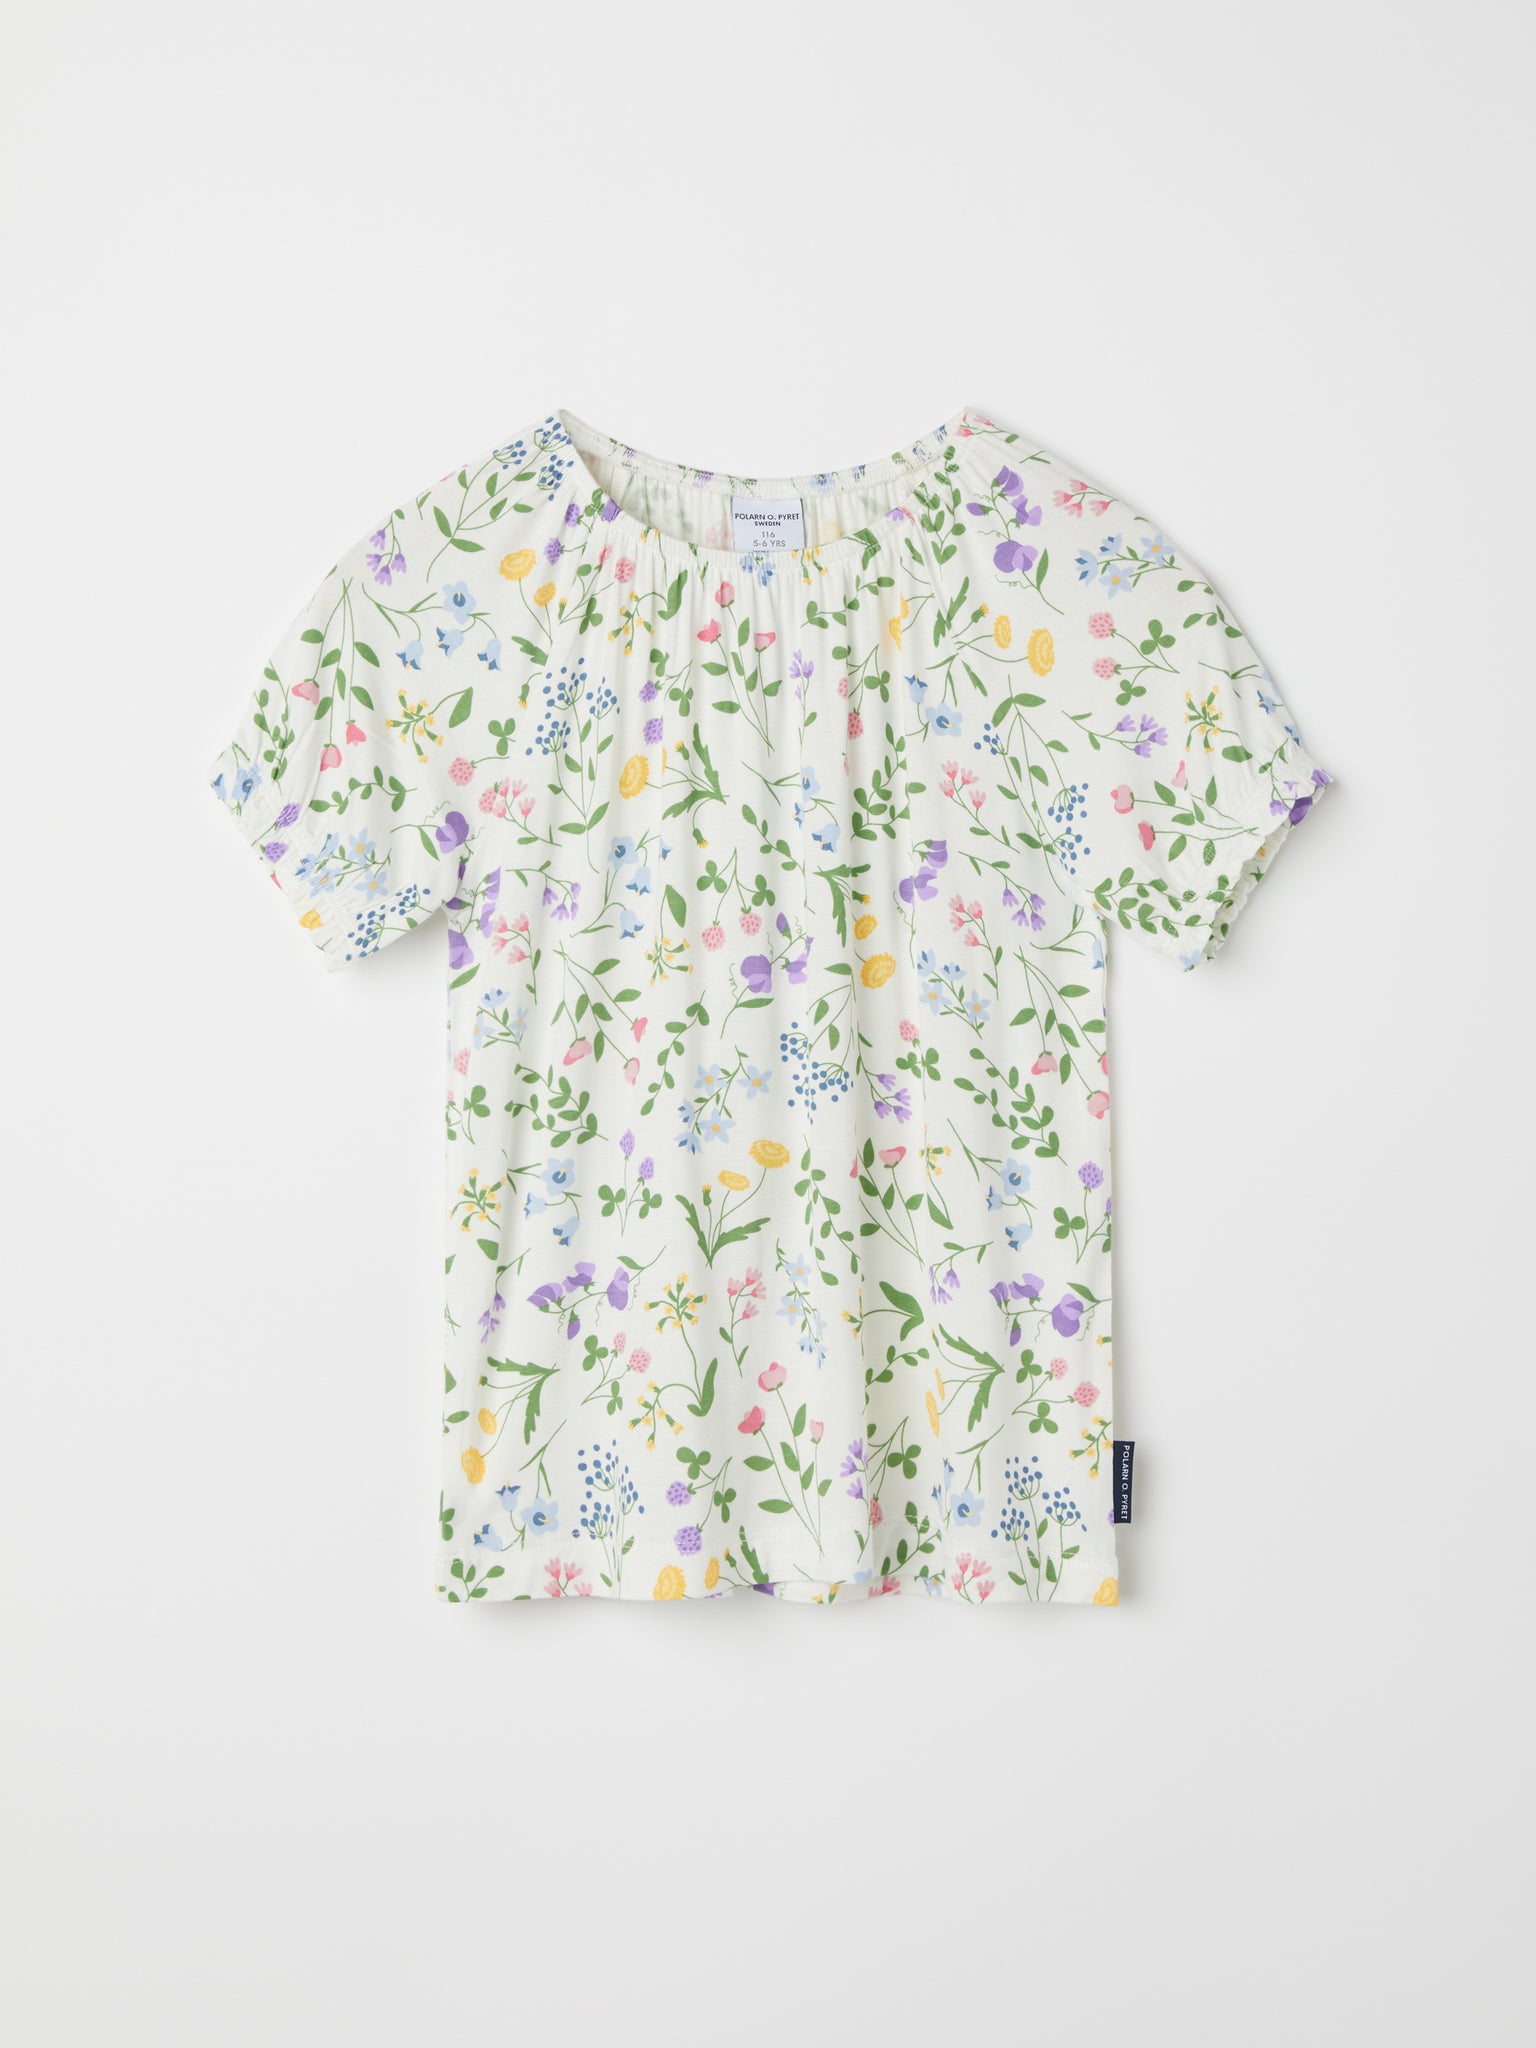 Ditsy Floral Kids T-Shirt in Organic Cotton from the Polarn O. Pyret kidswear collection. Clothes made using sustainably sourced materials.